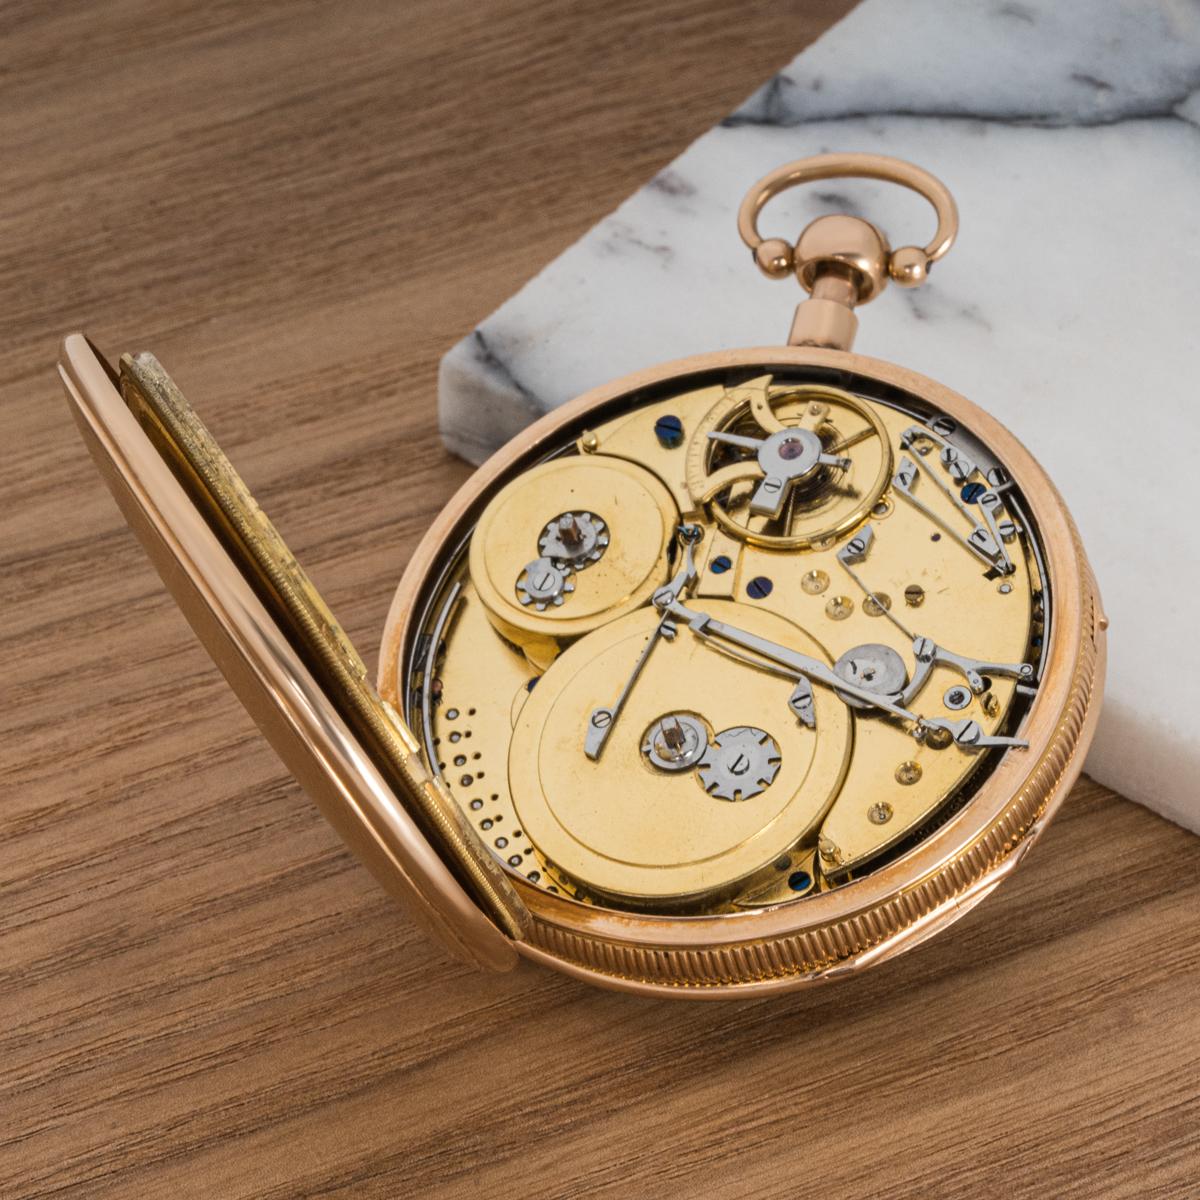 Breguet et Fils. A Gold Musical 1/4 Repeater Pocket Watch C1830 In Good Condition For Sale In London, GB